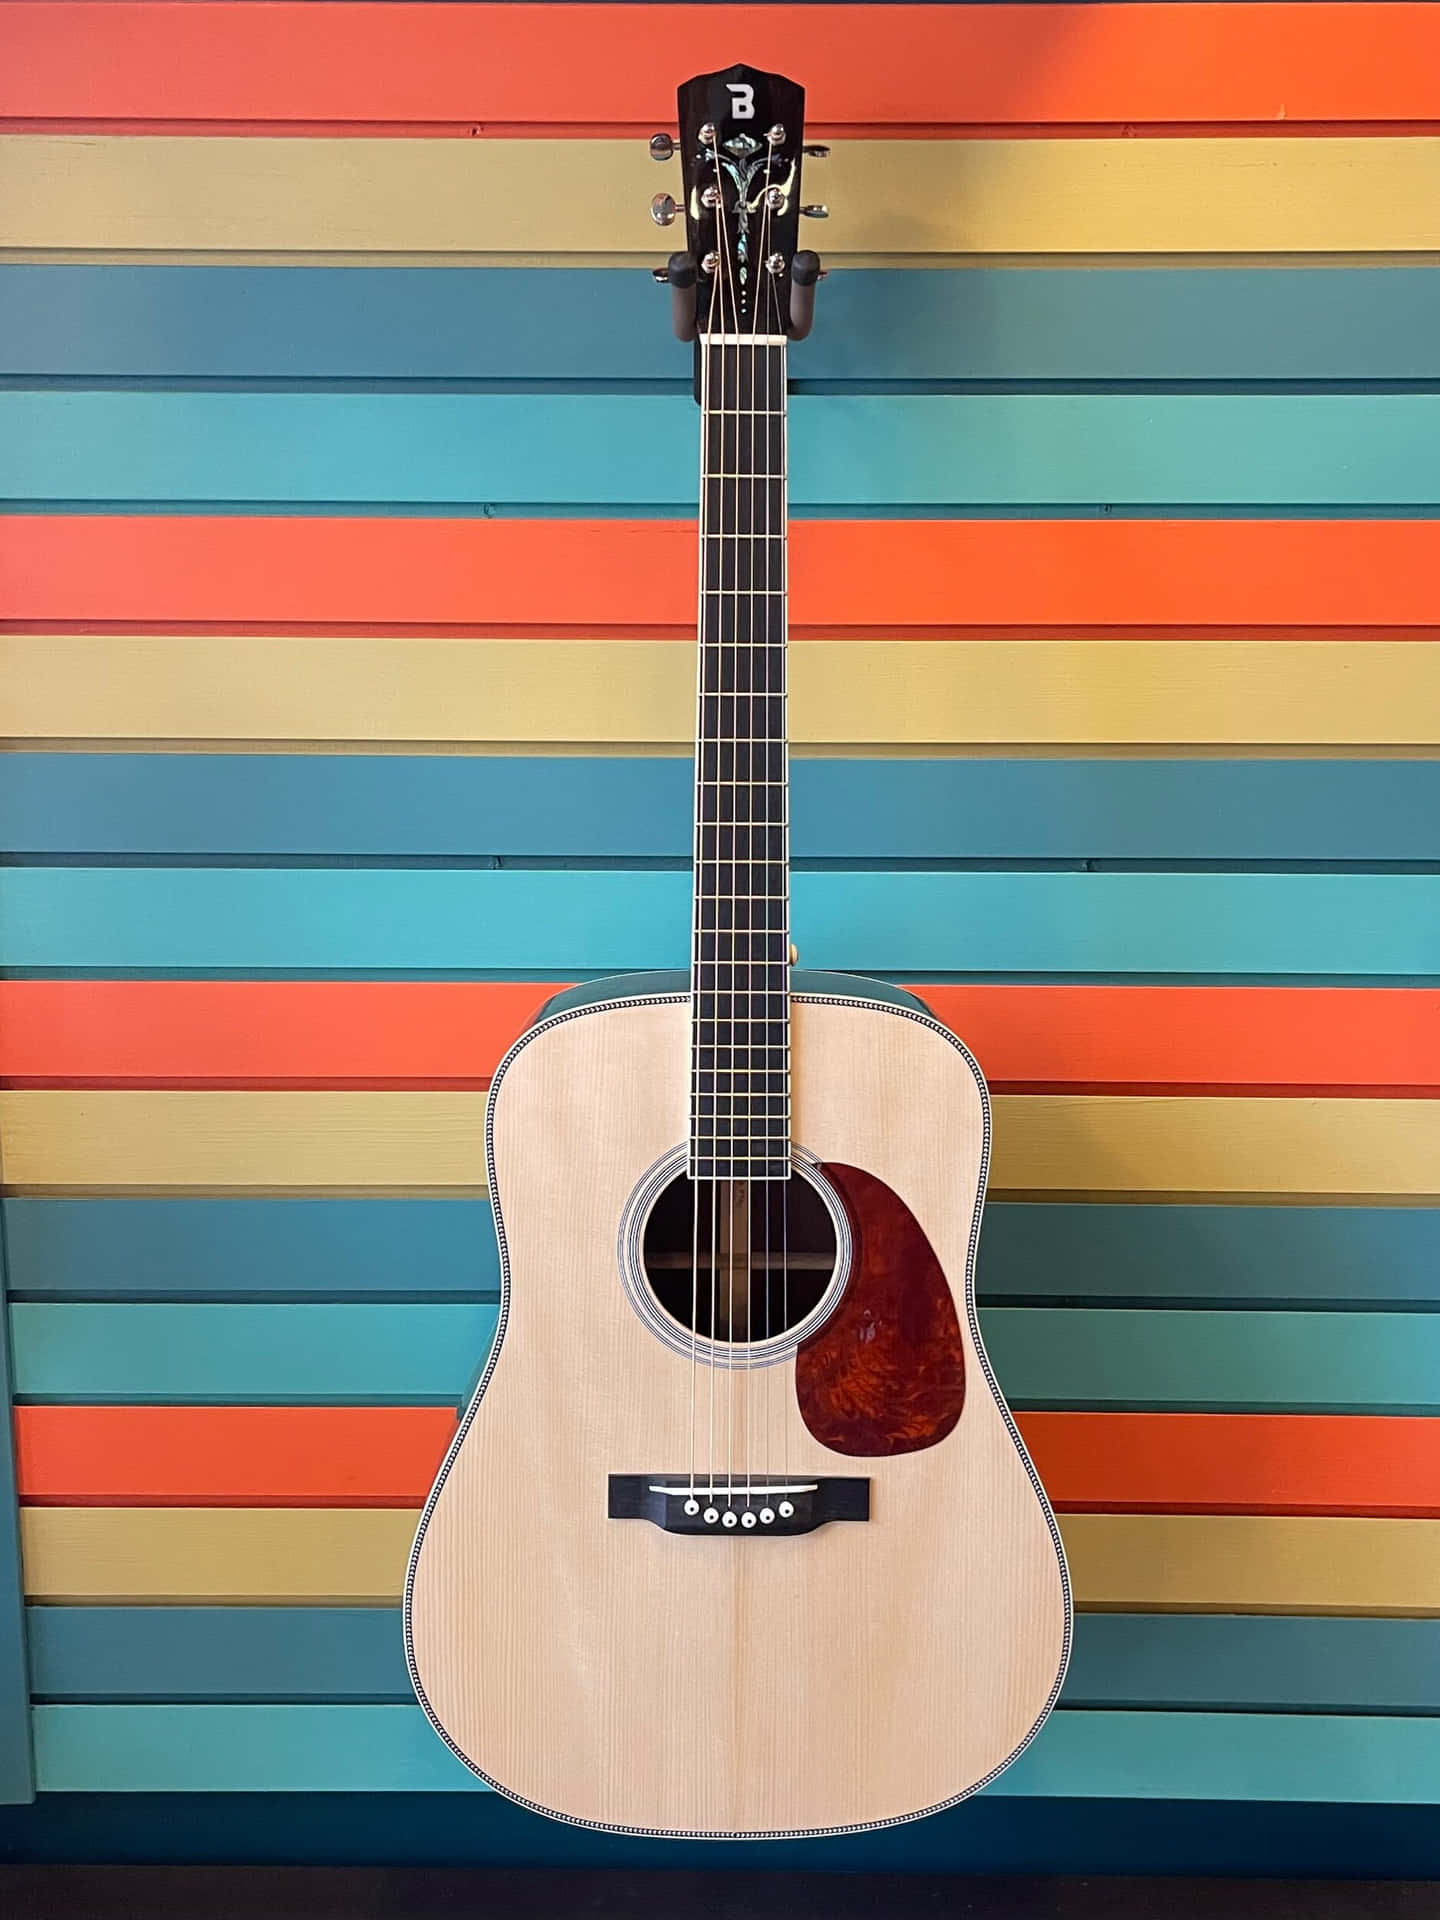 A Guitar Is Sitting Against A Colorful Wall Background